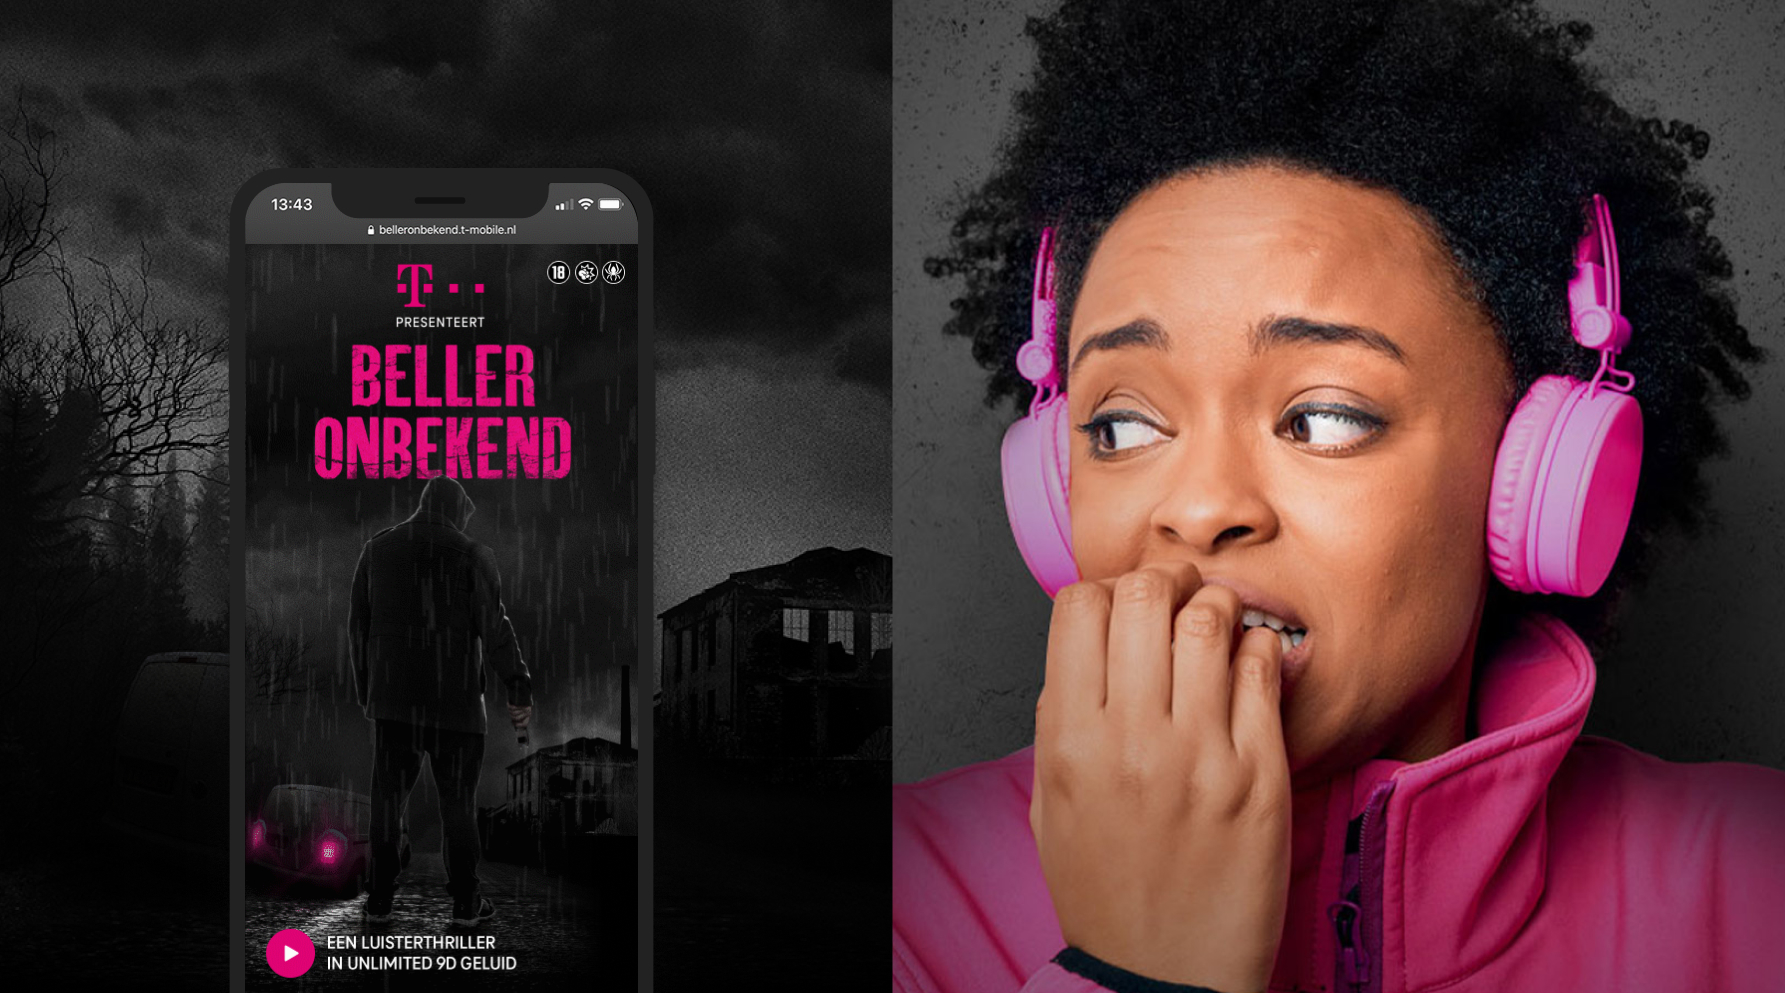 Image of a cellphone showing the landingpage of the "Beller onbekend" audio thriller book, and a second image of a scared woman biting her nails wearing pink headphones.